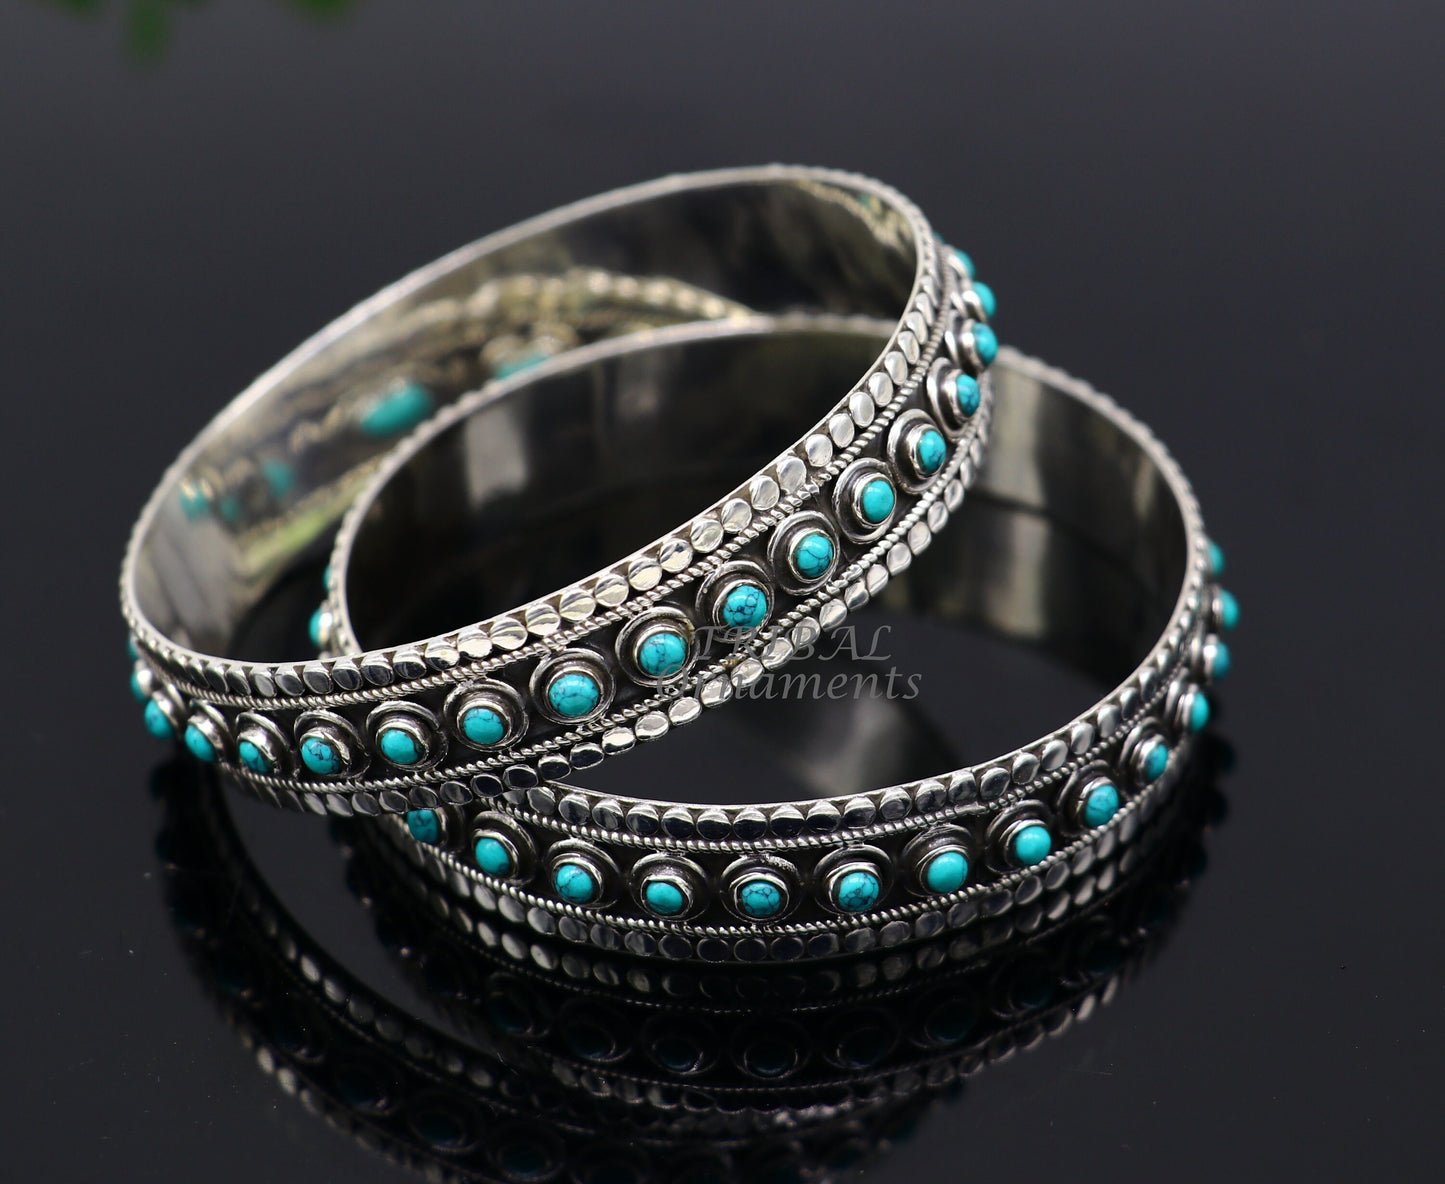 925 sterling silver customized vintage antique design turquoise stone bangle bracelet kada, best gift for brides ethnic jewelry nba337